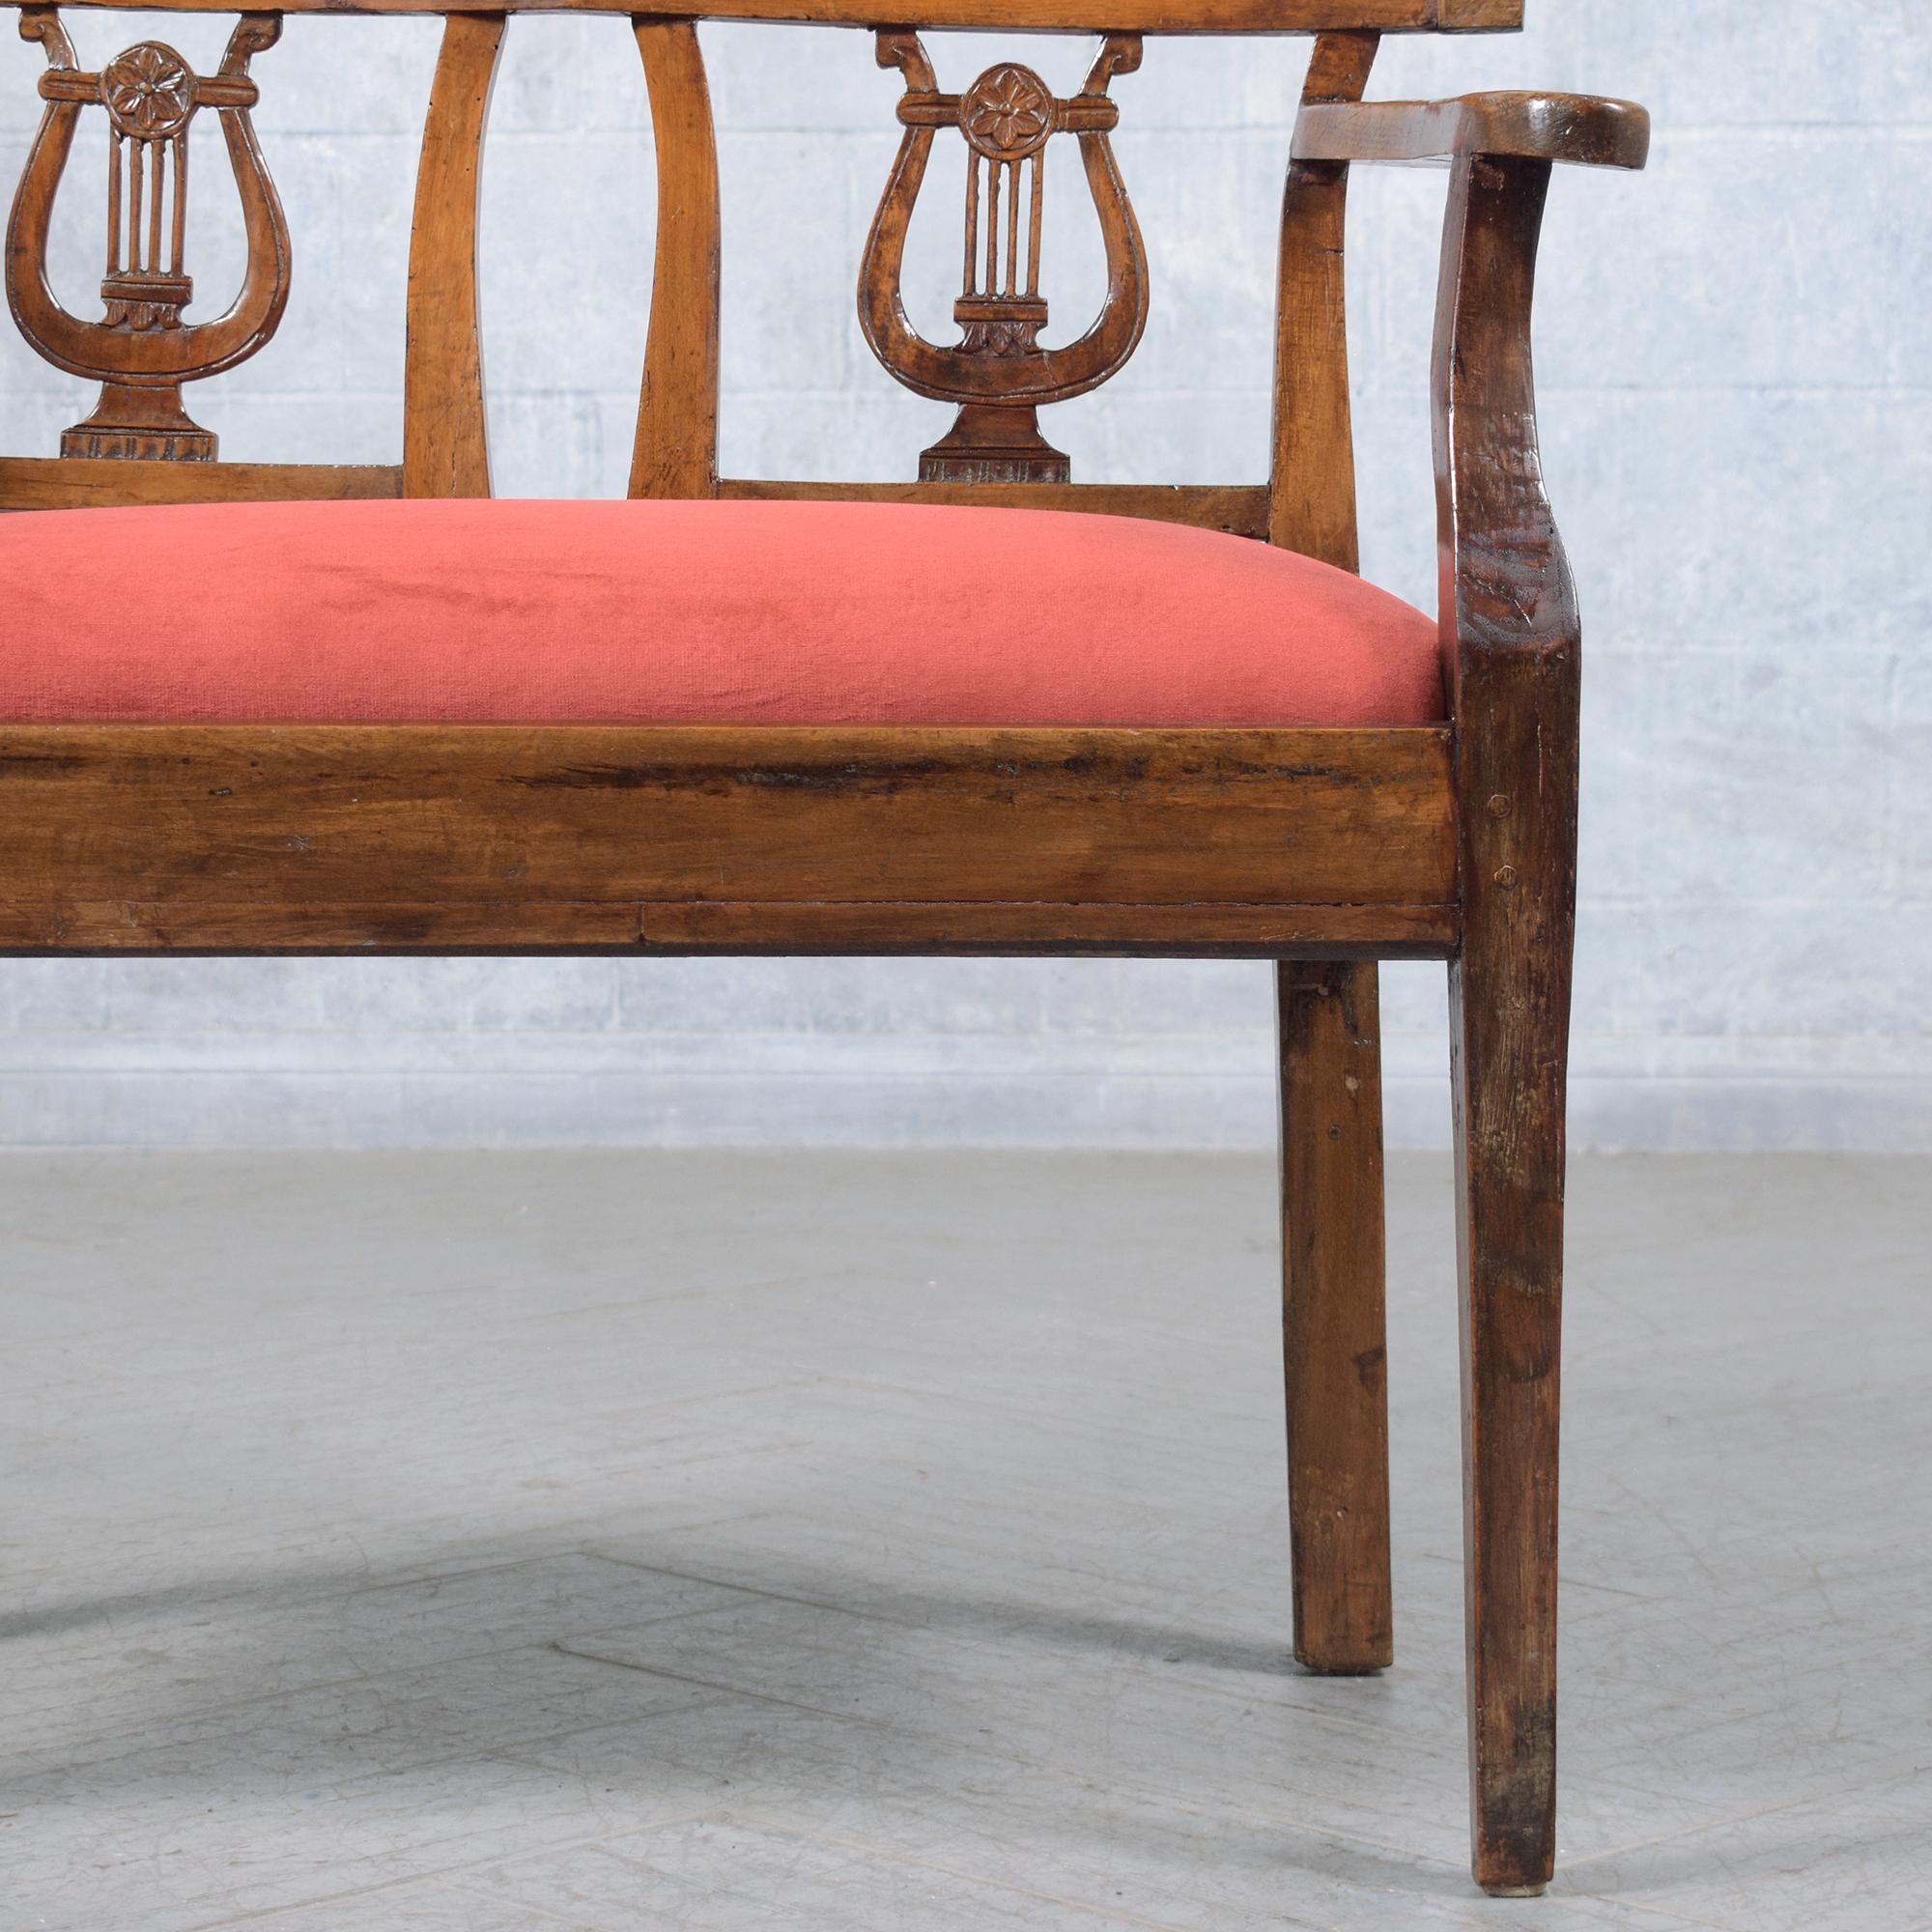 Late 18th-Century English Walnut Bench: Historical Craftsmanship Restored In Good Condition For Sale In Los Angeles, CA